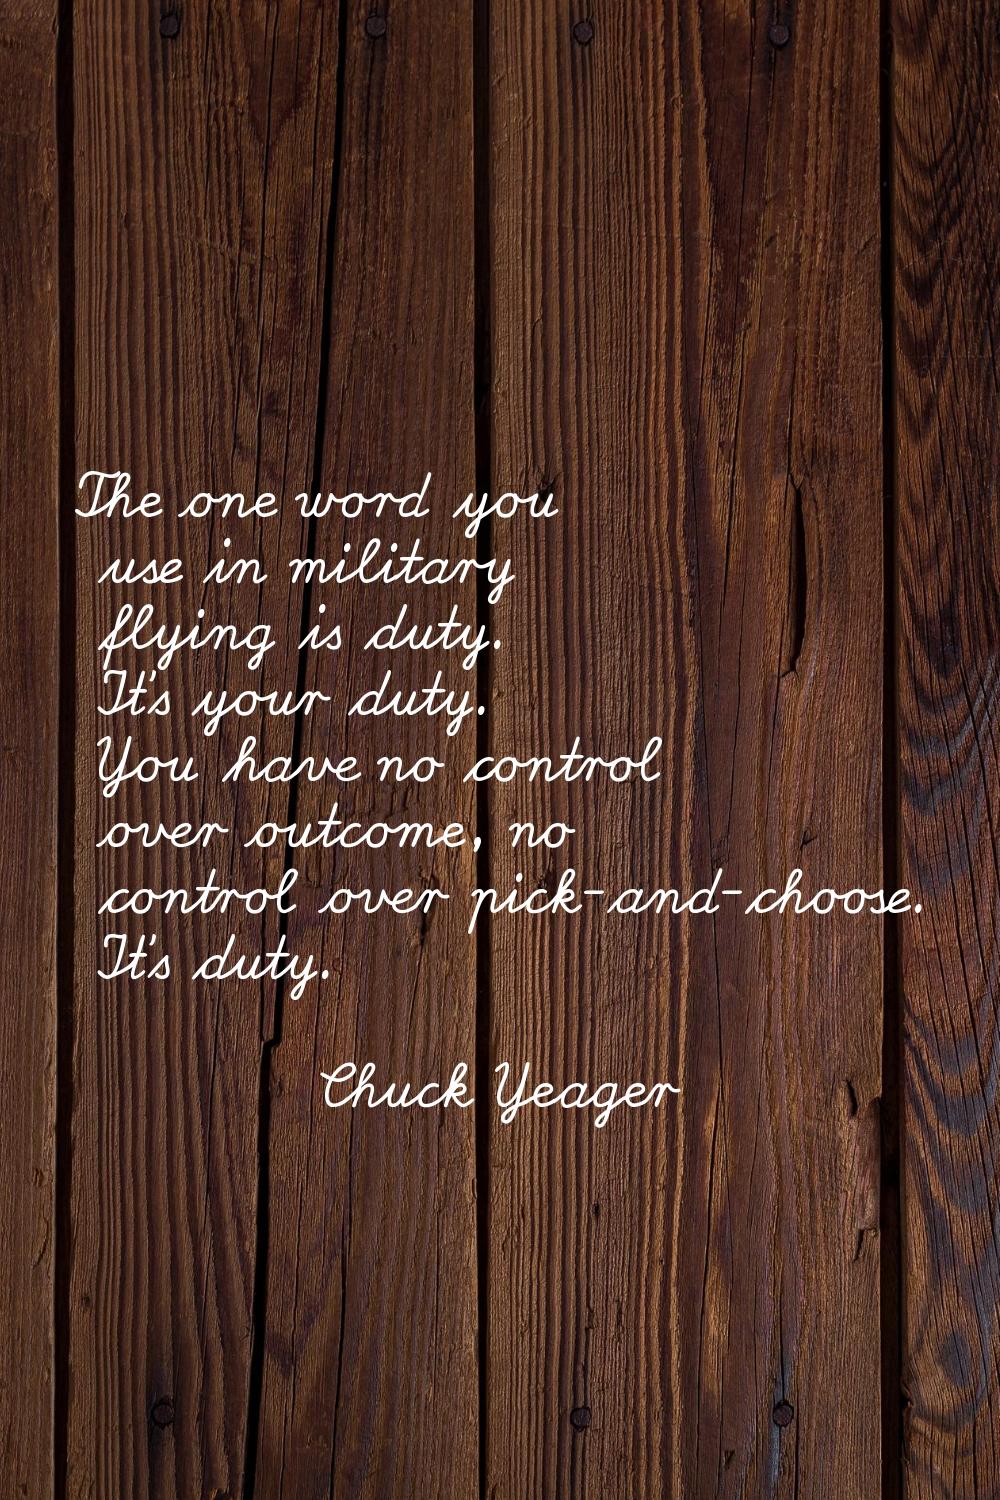 The one word you use in military flying is duty. It's your duty. You have no control over outcome, 